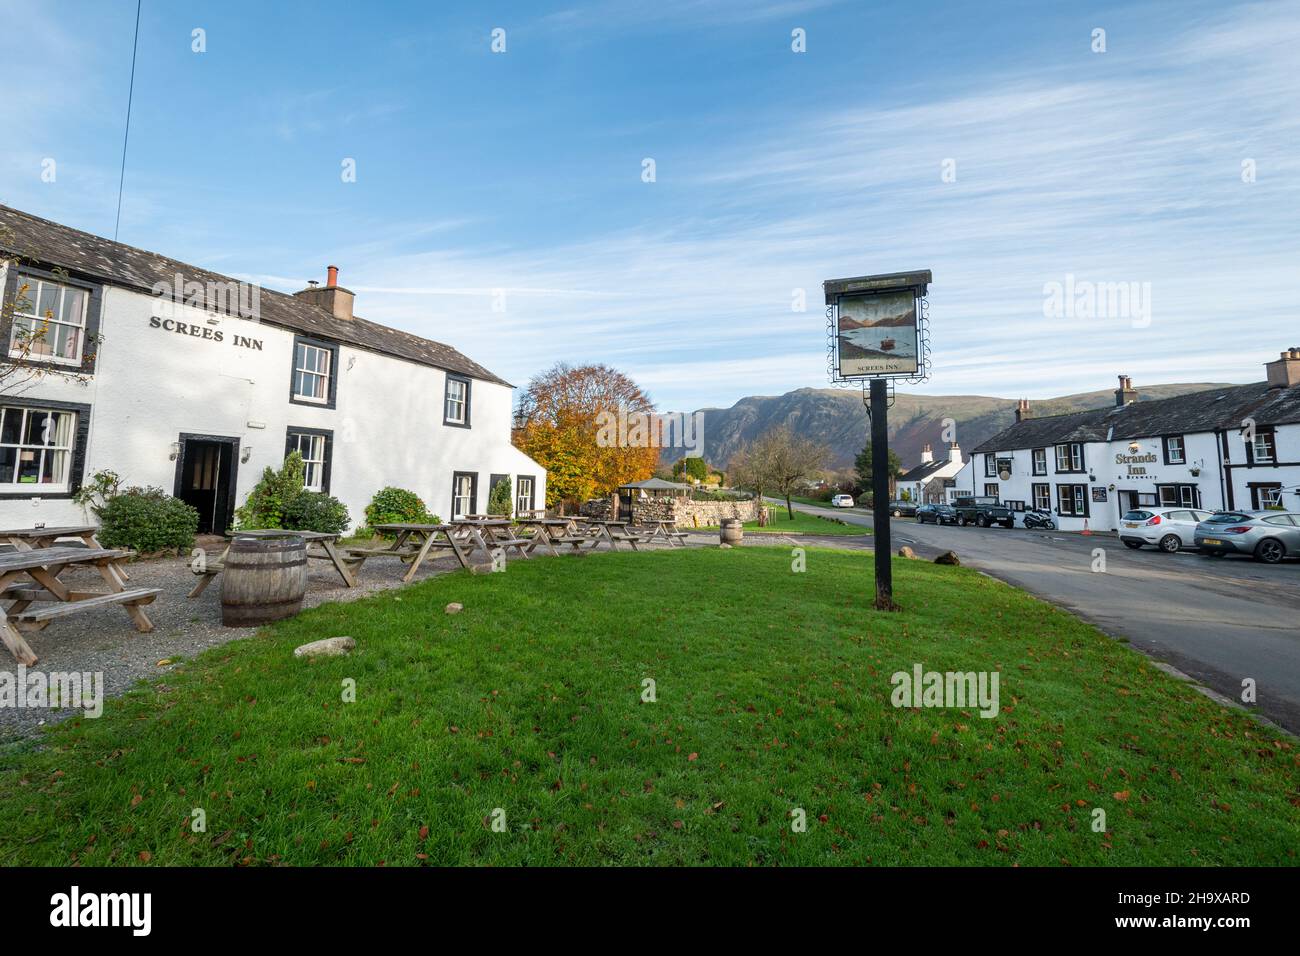 The Screes Inn in Nether Wasdale, Seascale, Cumbria. A pub and hotel in the Lake District National Park, during November or Autumn, UK Stock Photo